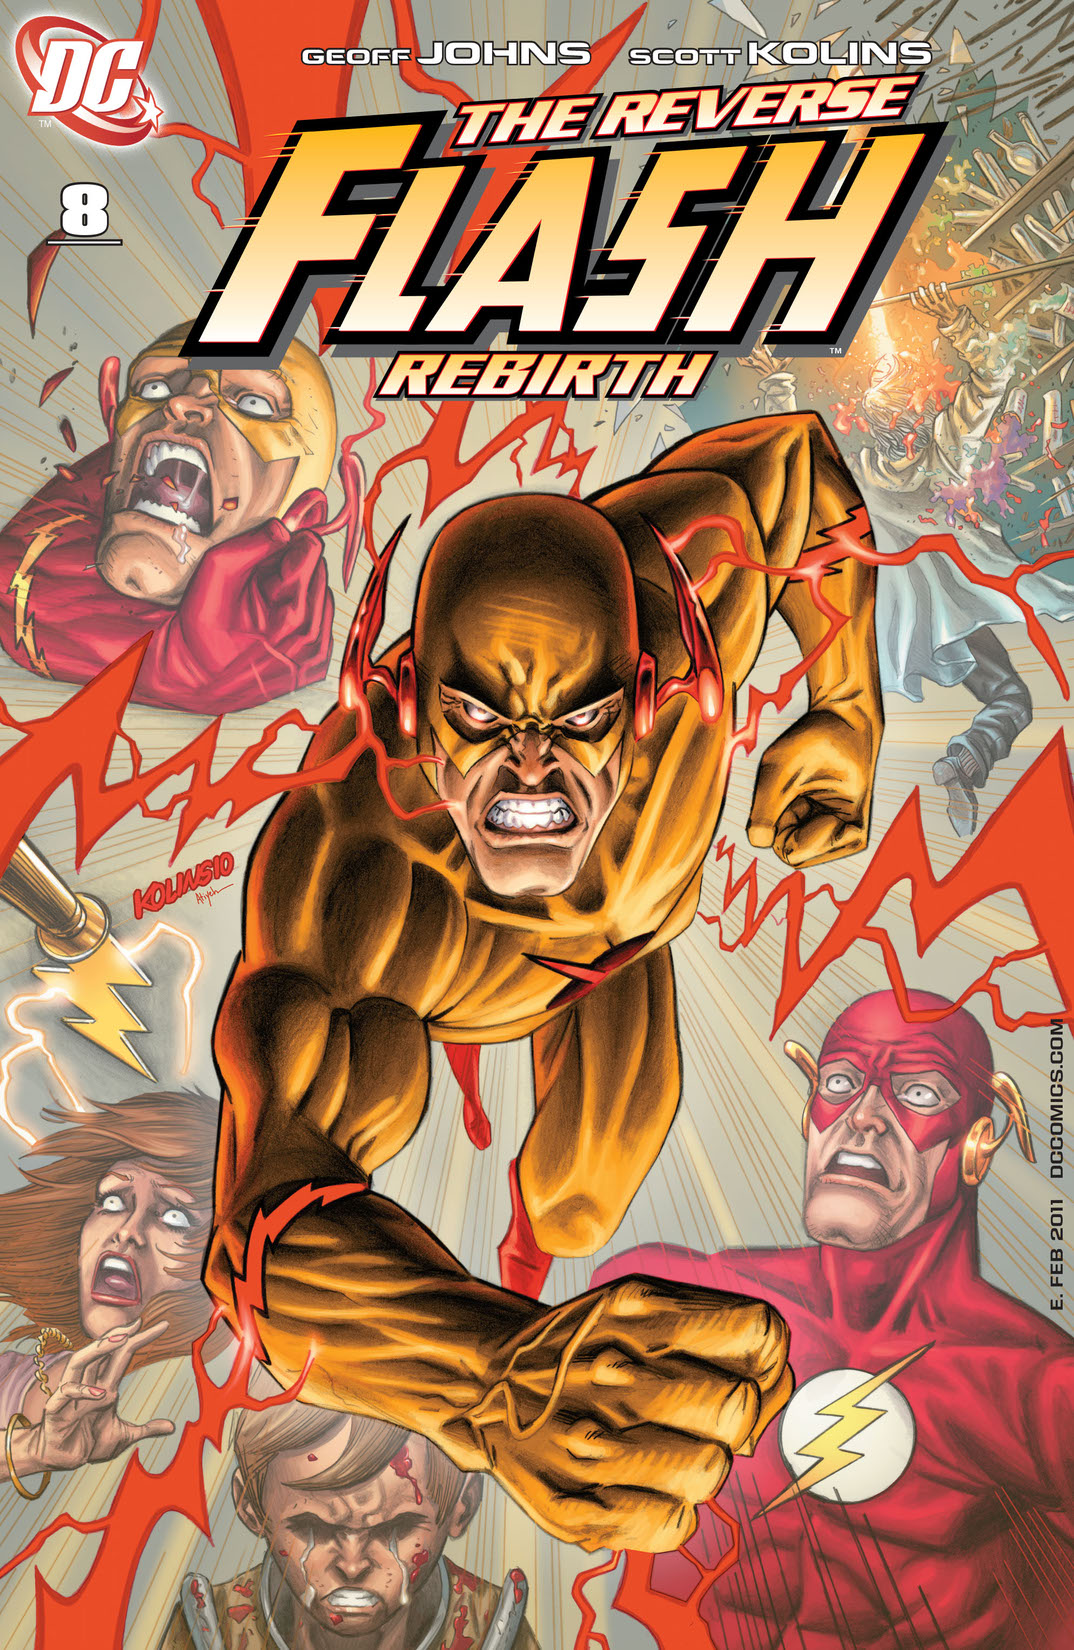 Flash (2010-) #8 preview images